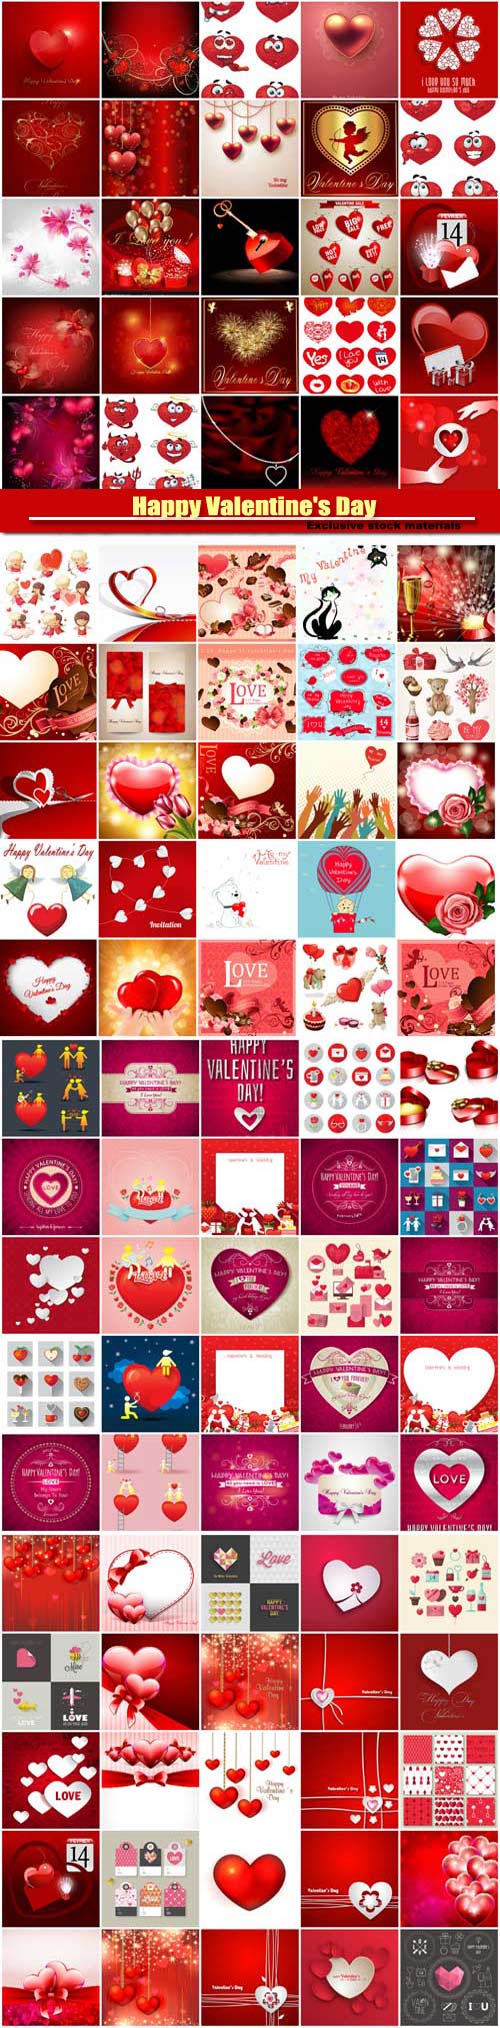 Big collection of vector festive Valentine's Day